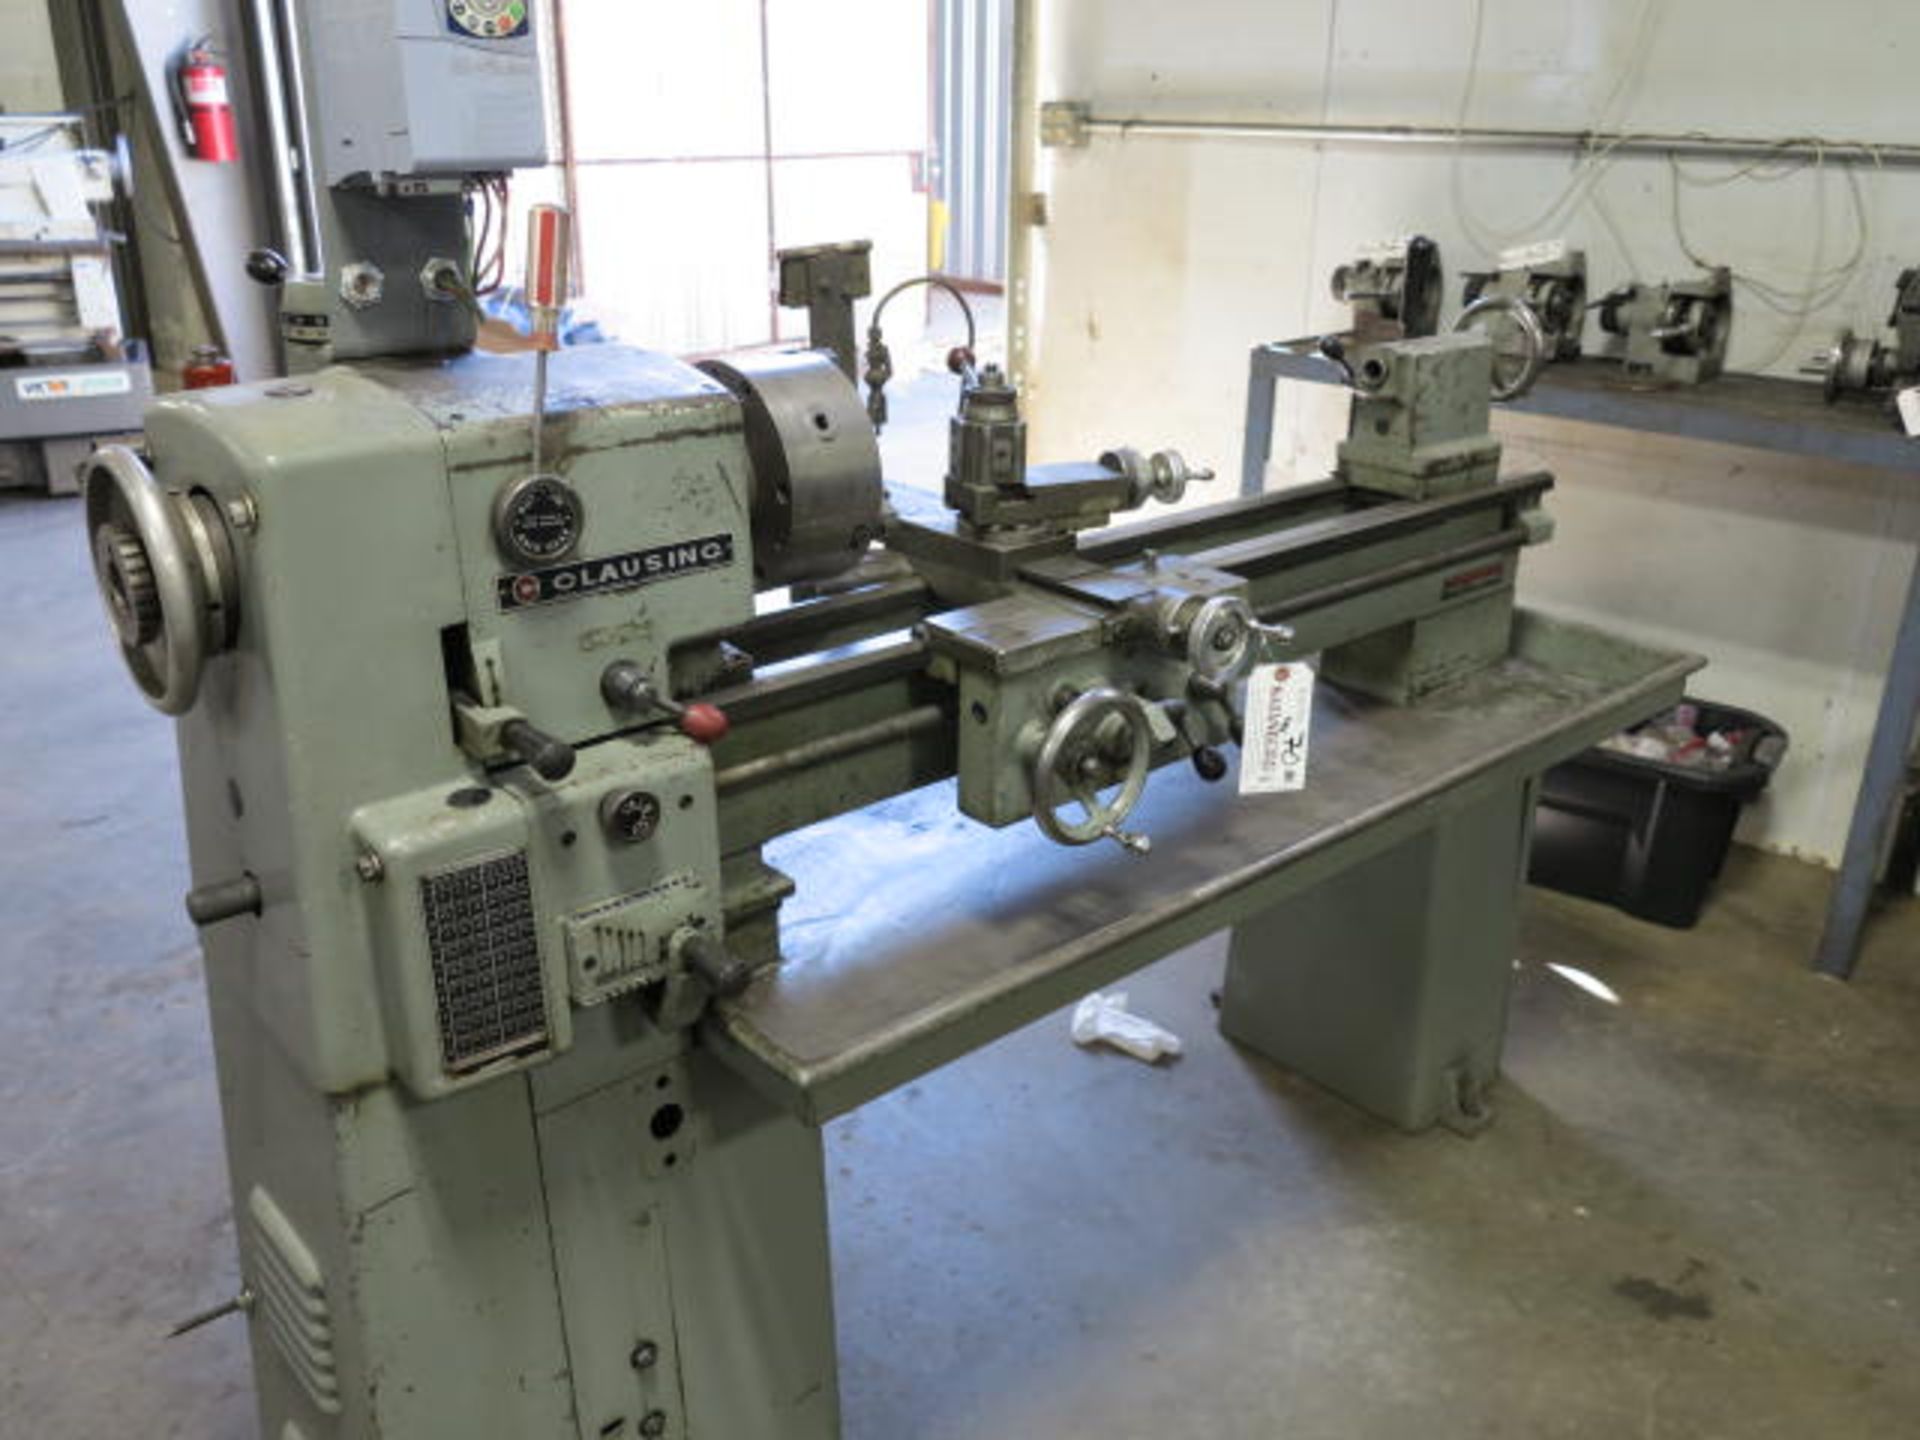 Clausing 12'' x 36'' Lathe Model 5014, S/N 501304, 8'' Chuck, Variable Speed Spindle, 52-2000 RPM - Image 2 of 2